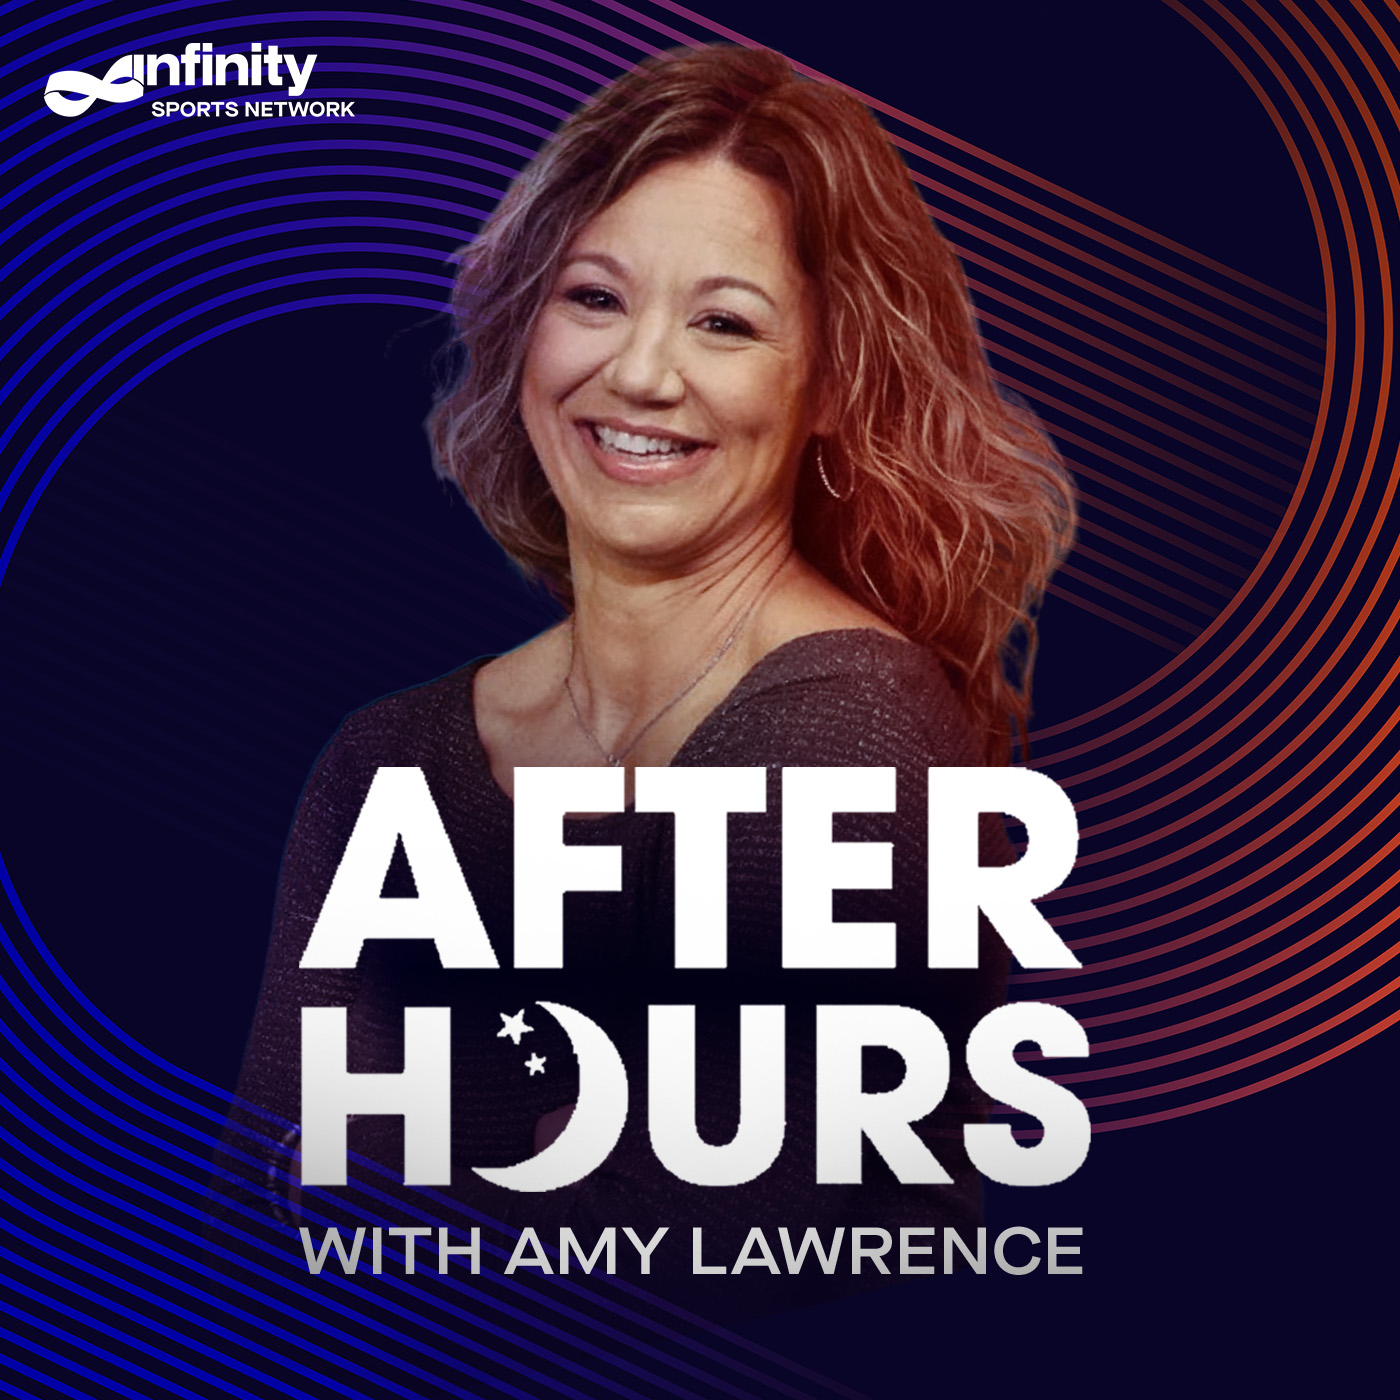 11-2-21 After Hours with Amy Lawrence PODCAST: Hour 2